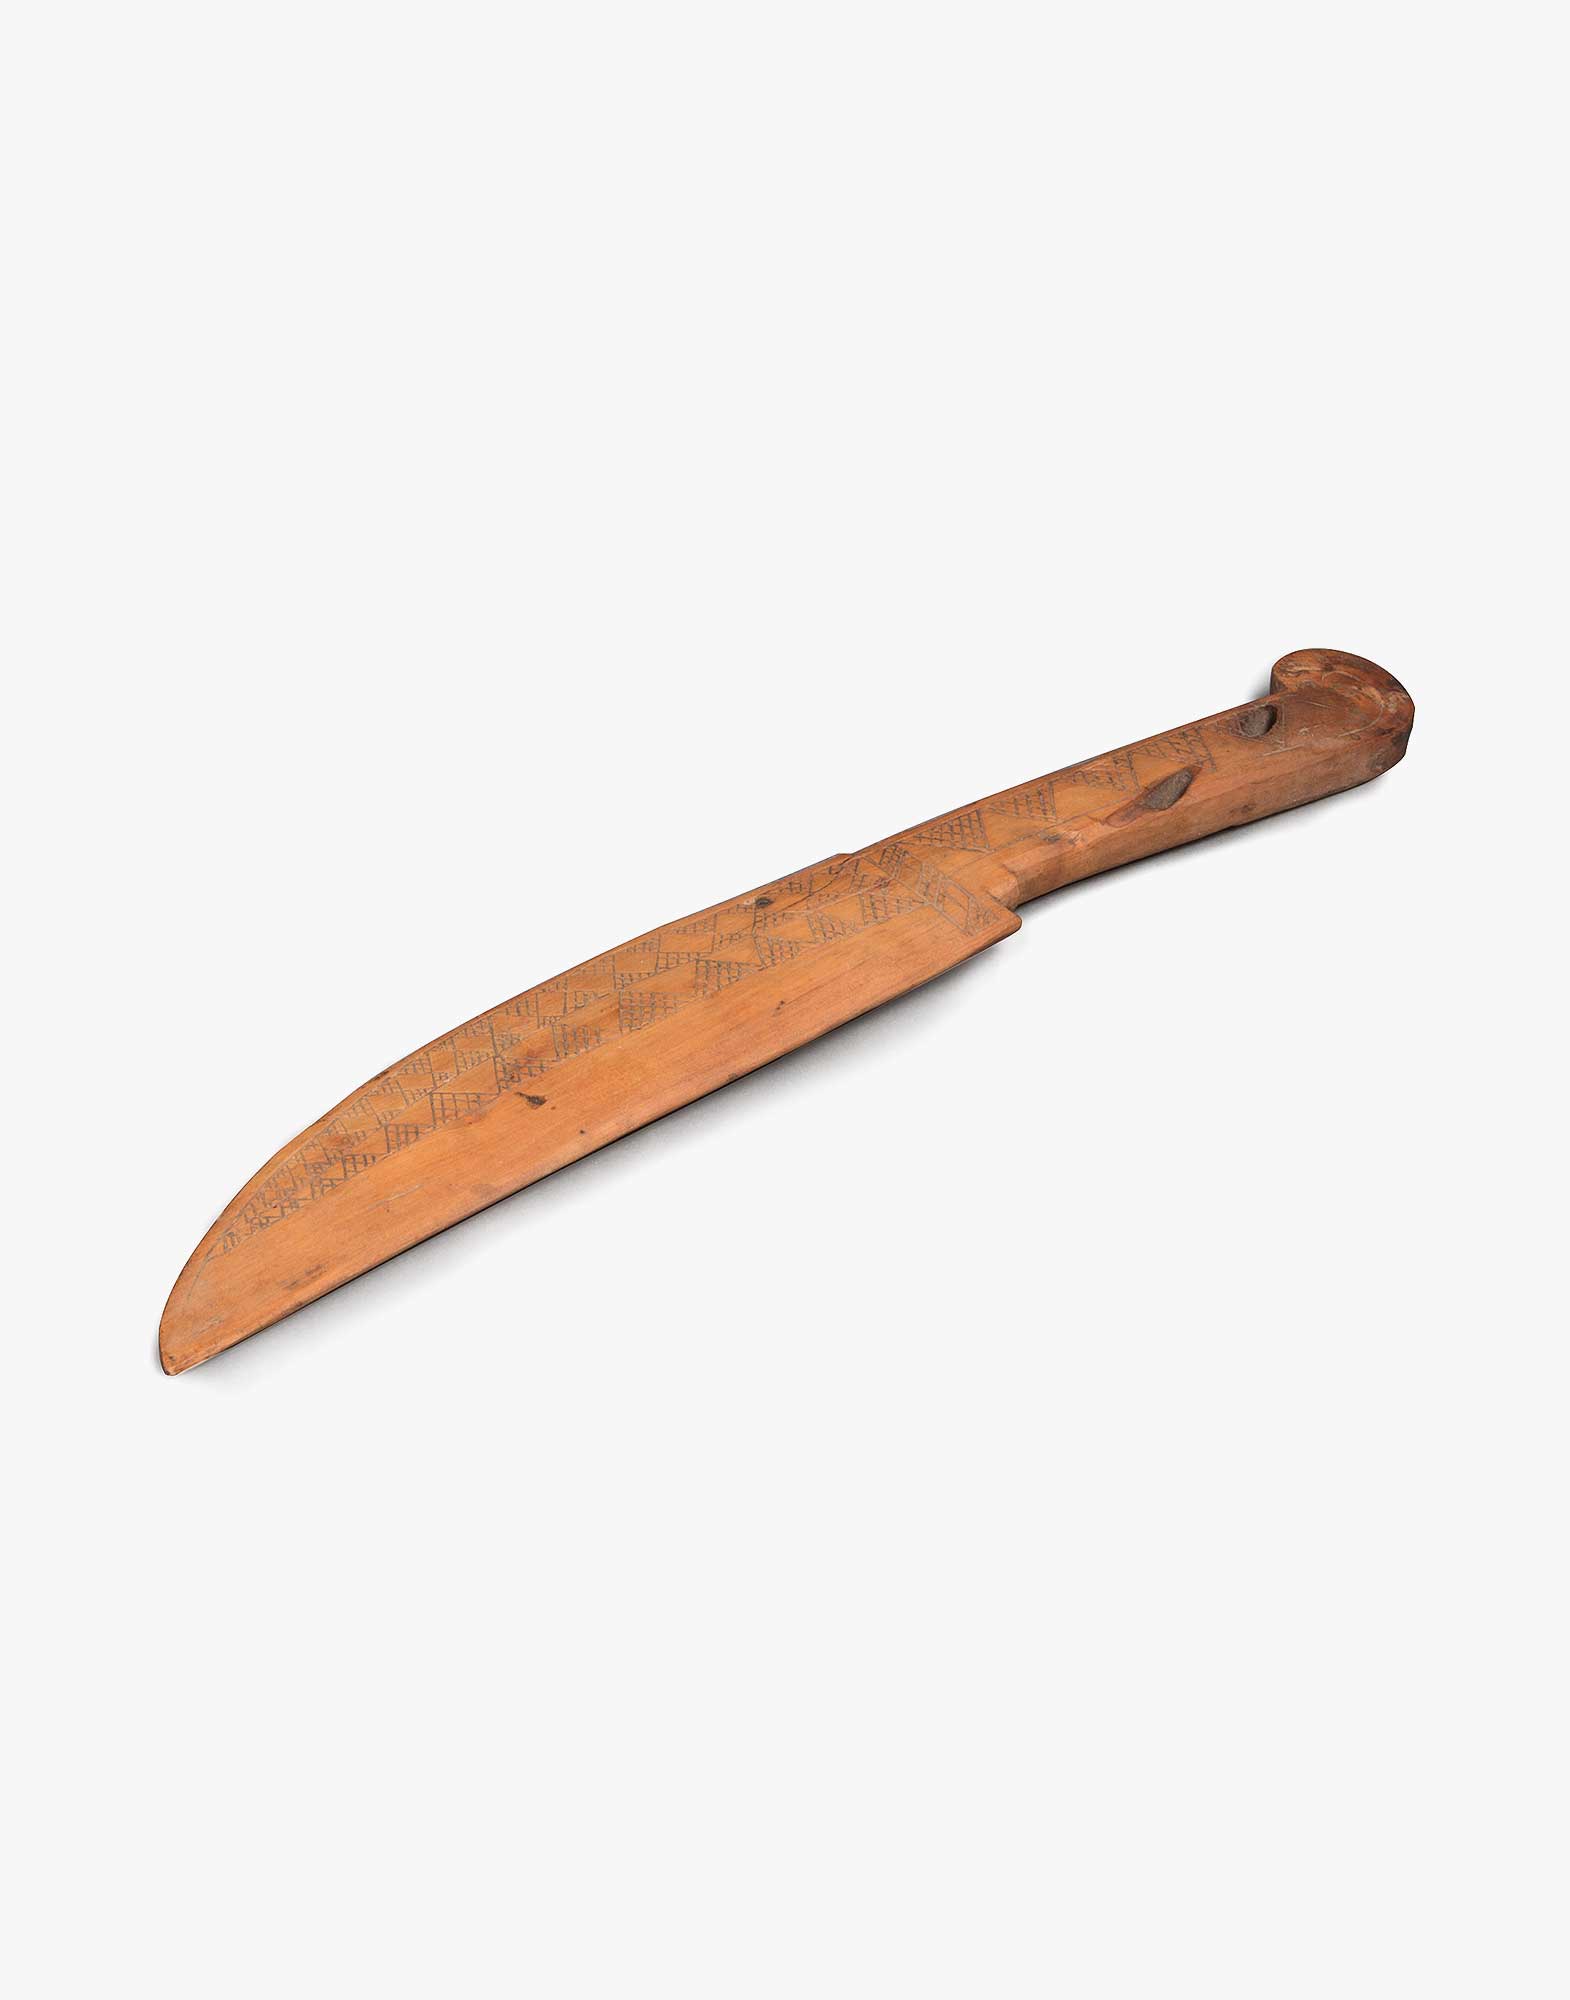 Antique Handcrafted Wooden Knife - Kichy